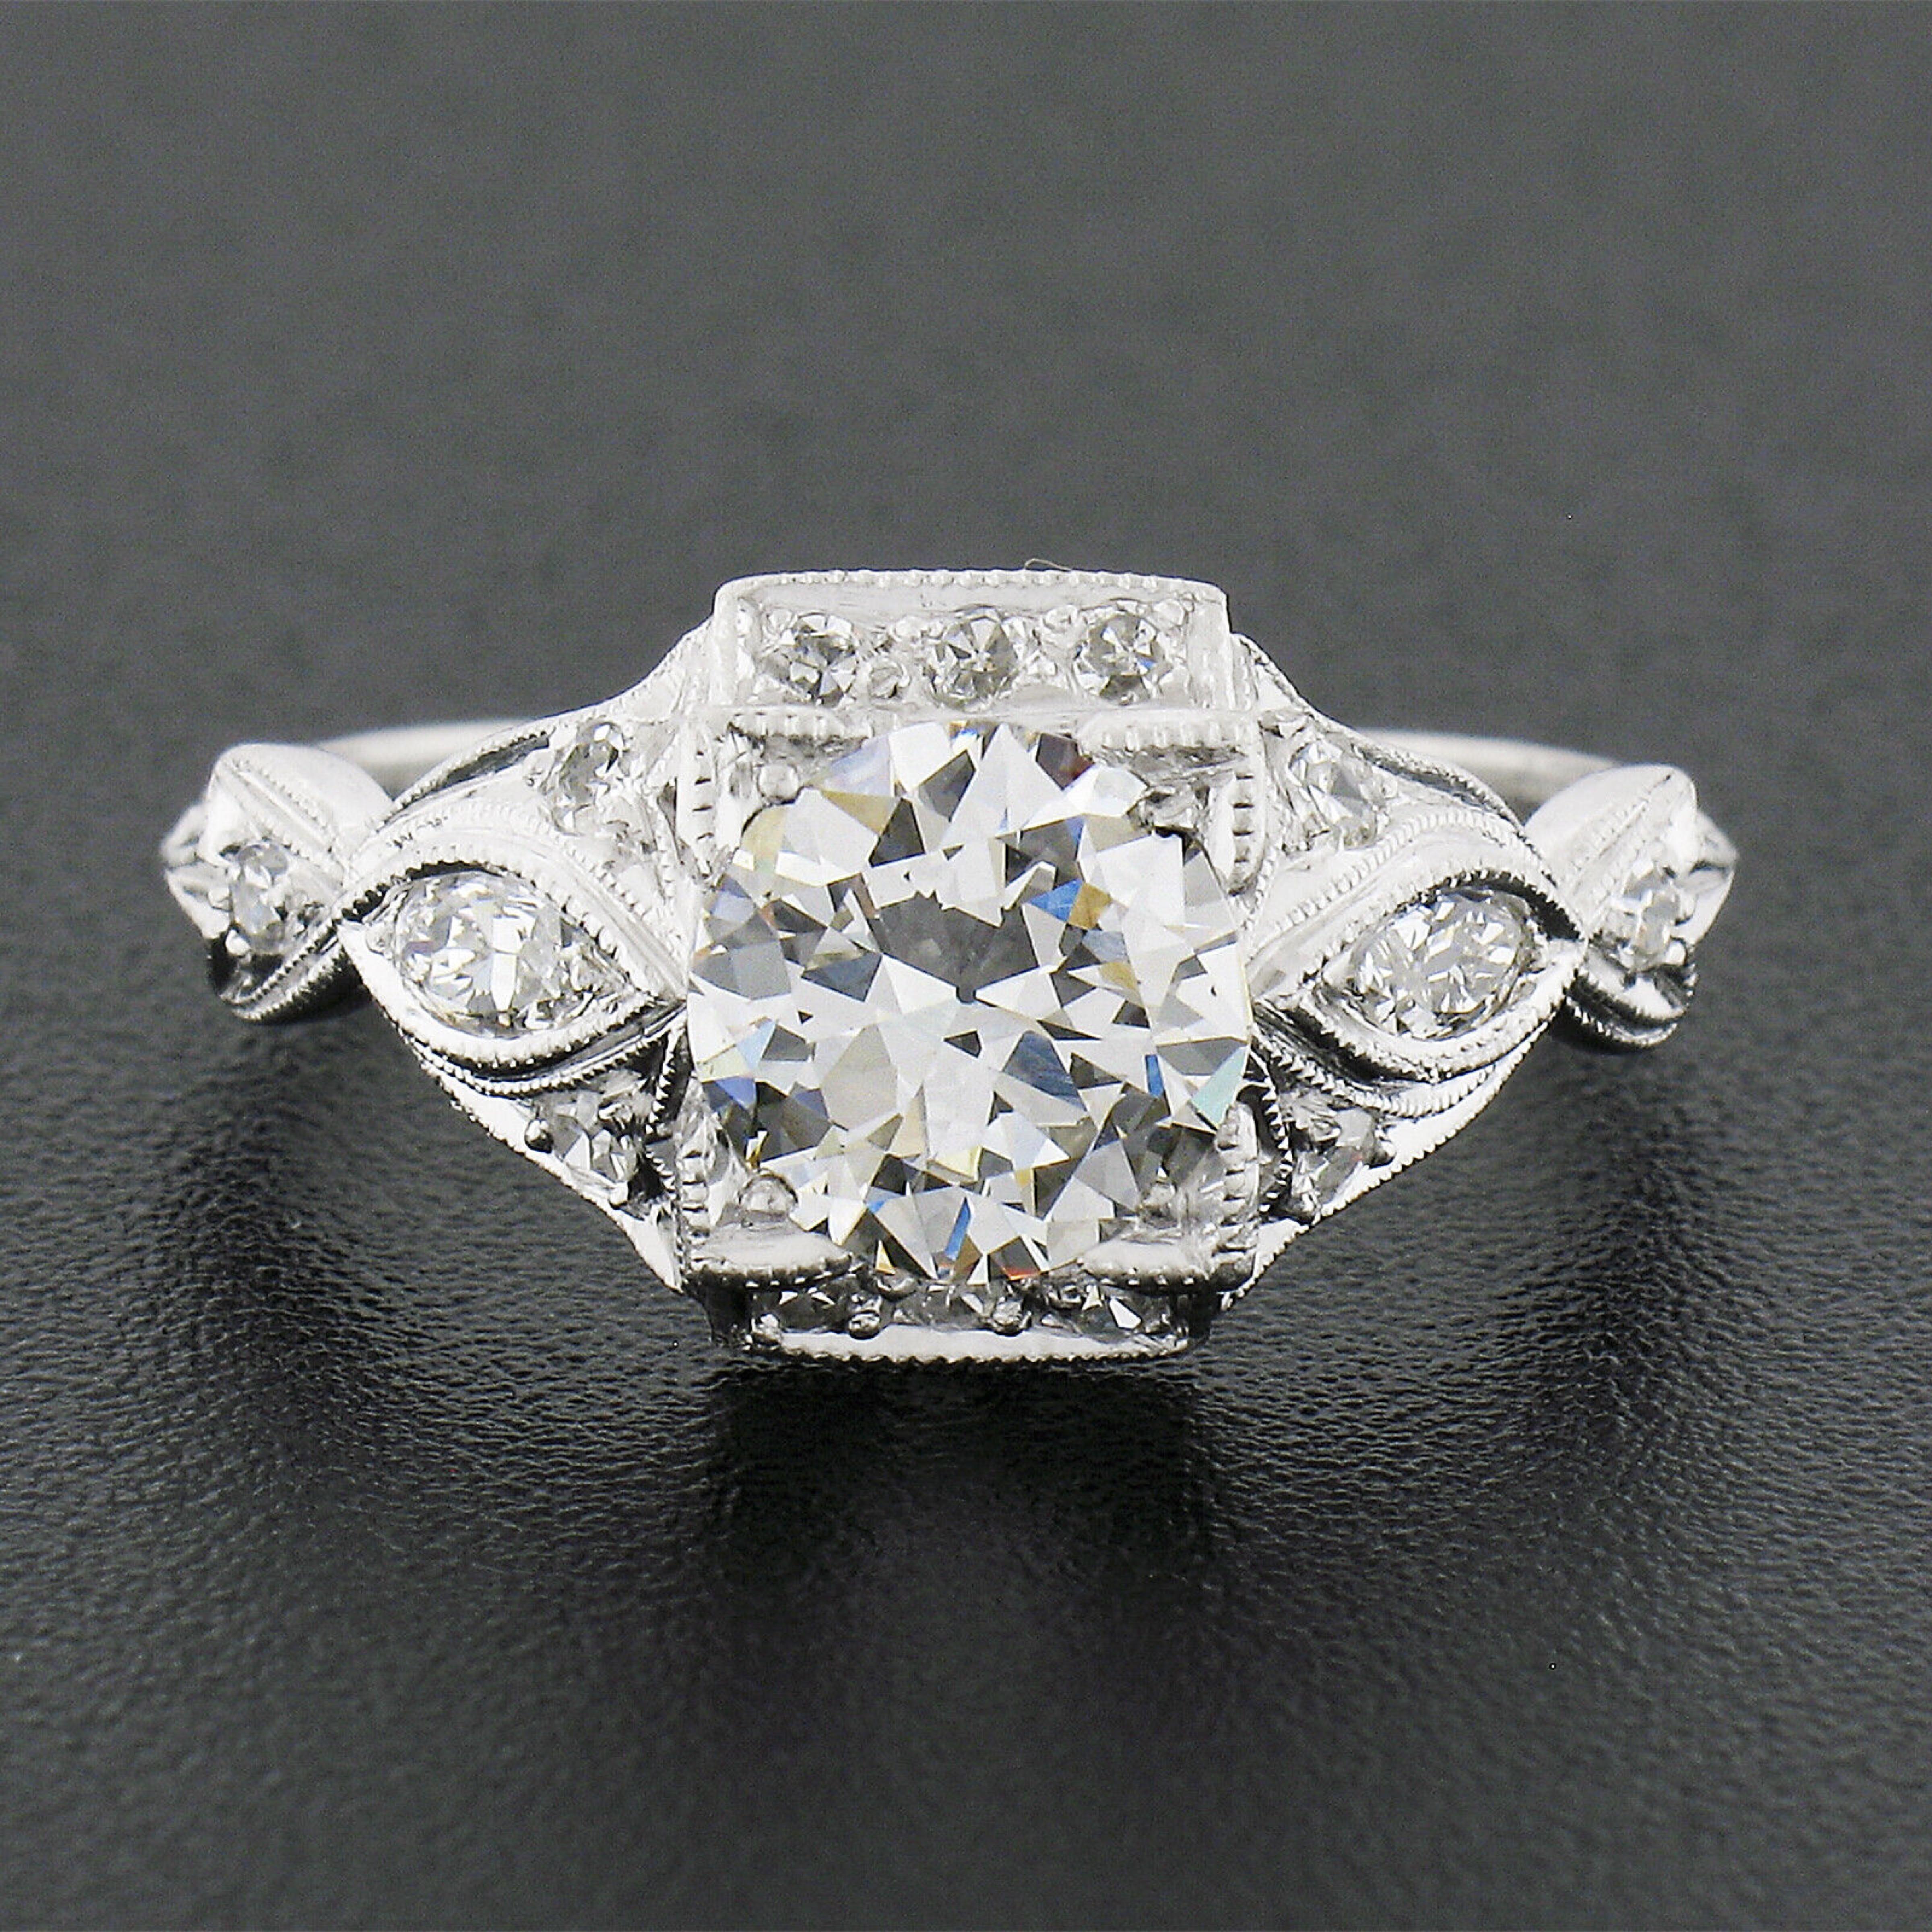 This is an absolutely breathtaking, highly detailed, antique engagement ring that was crafted from solid platinum during the Edwardian/Art Deco period. It features a GIA certified old European cut diamond neatly set at the center and elegantly held